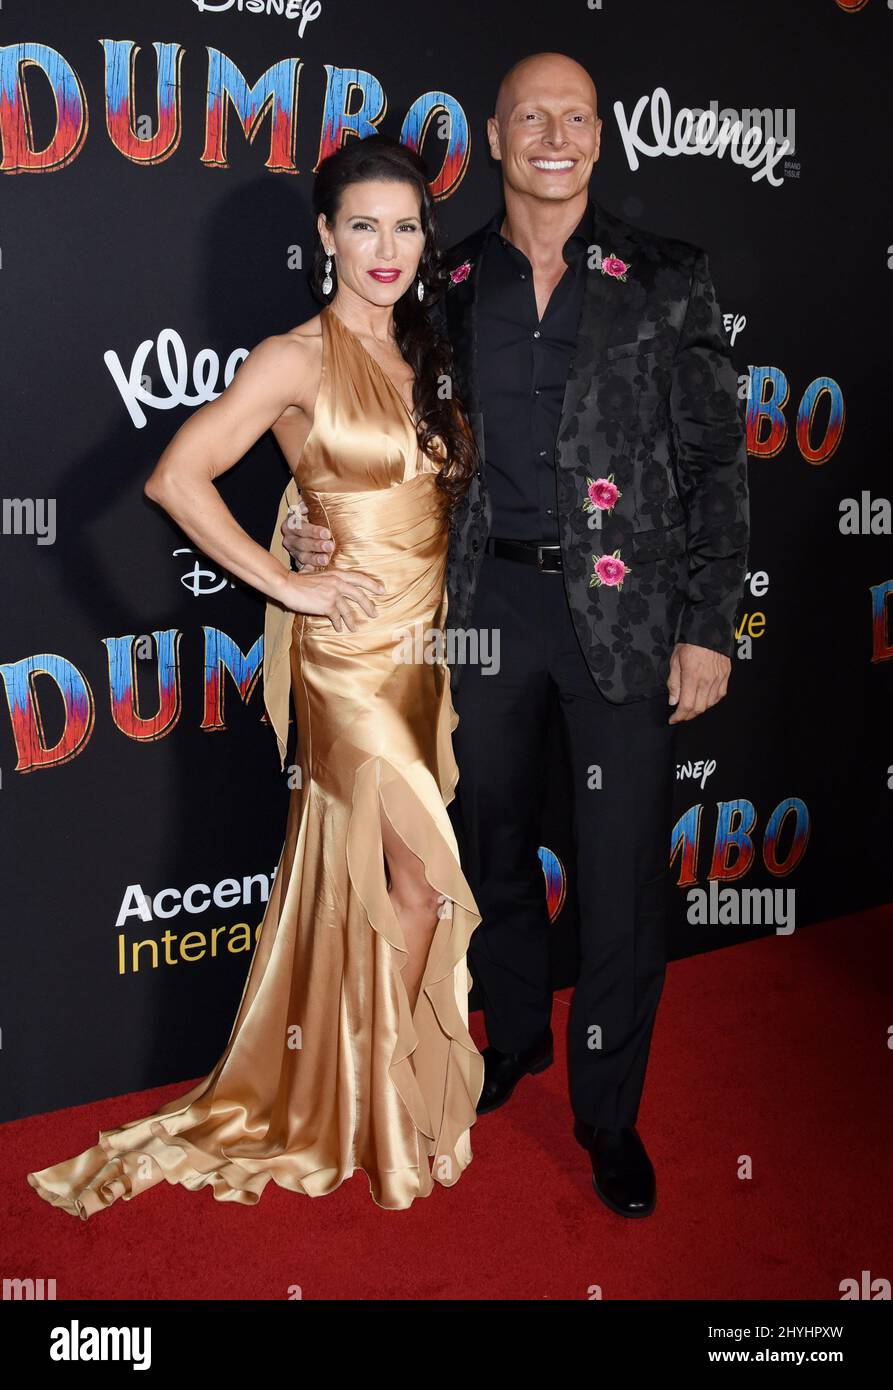 Mercy Malick and Joseph Gatt arriving for Disney's premiere of 'Dumbo' held at the El Capitan Theatre on March 11, 2019 in Hollywood, Los Angeles. Stock Photo